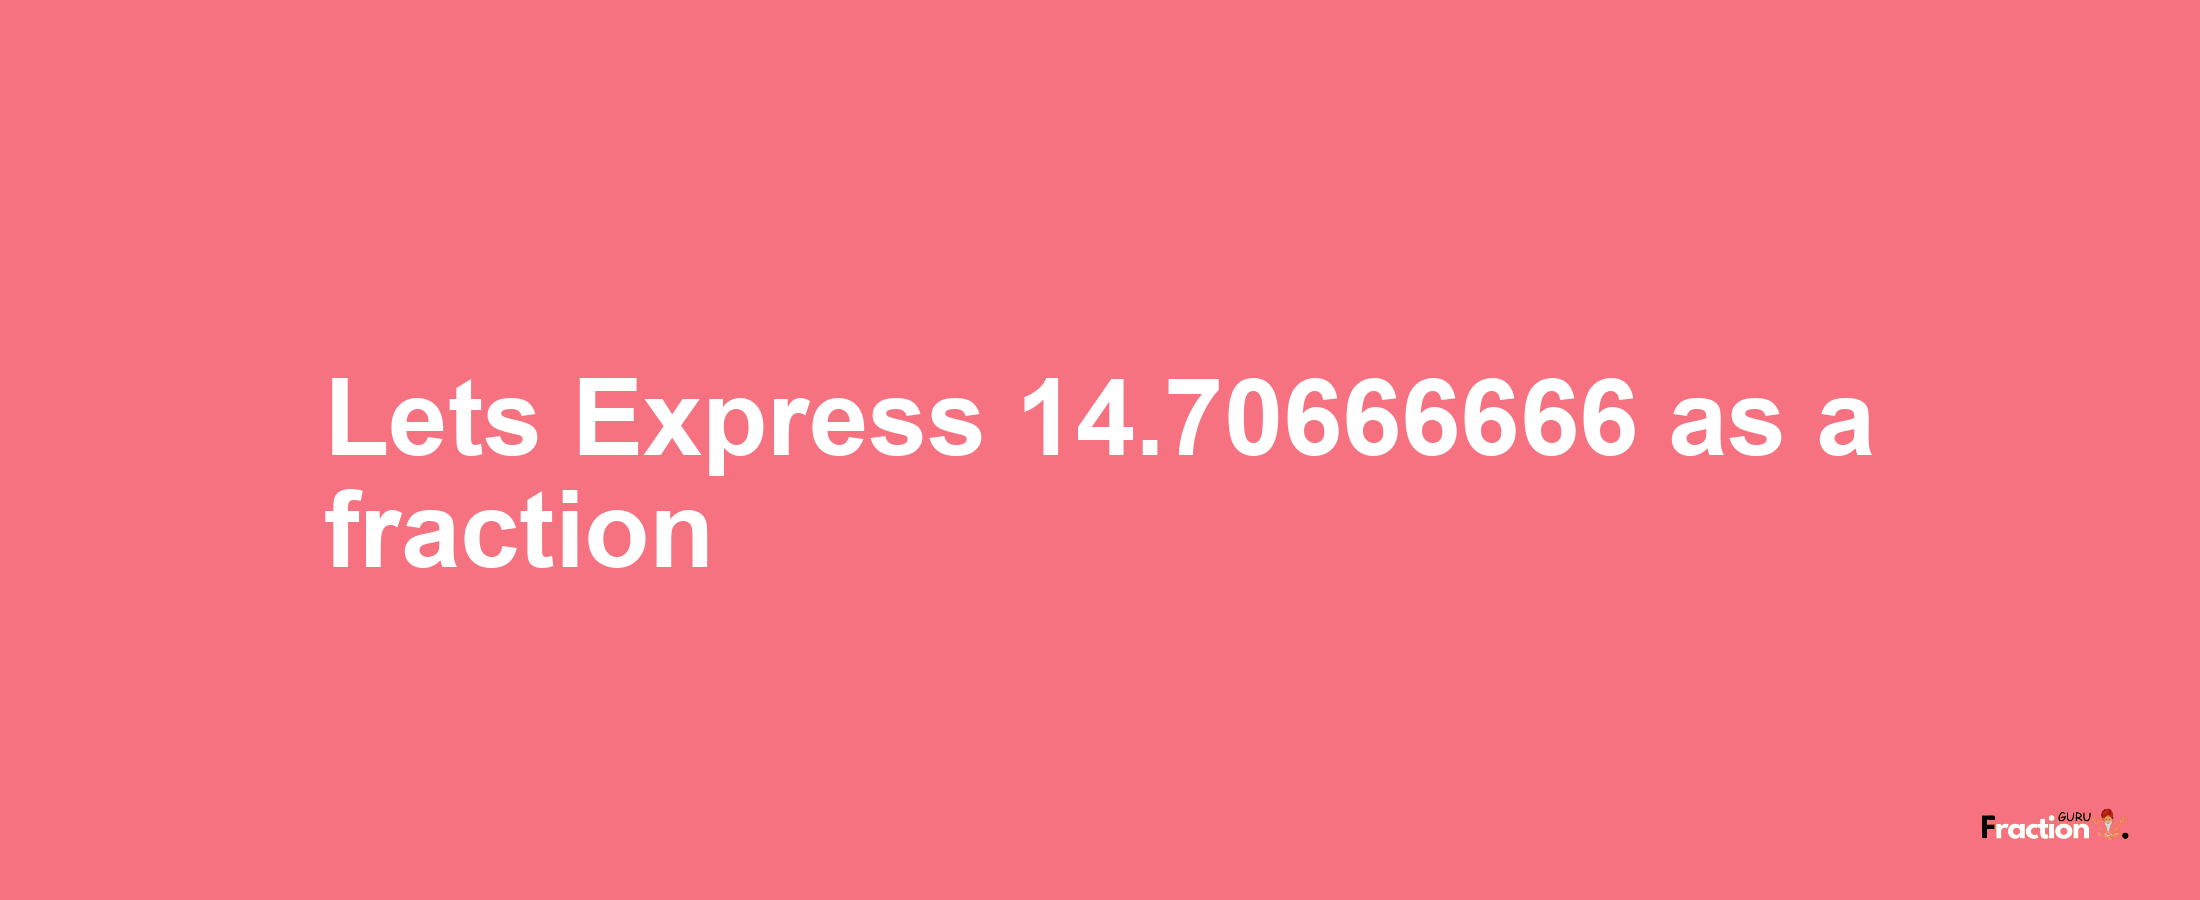 Lets Express 14.70666666 as afraction